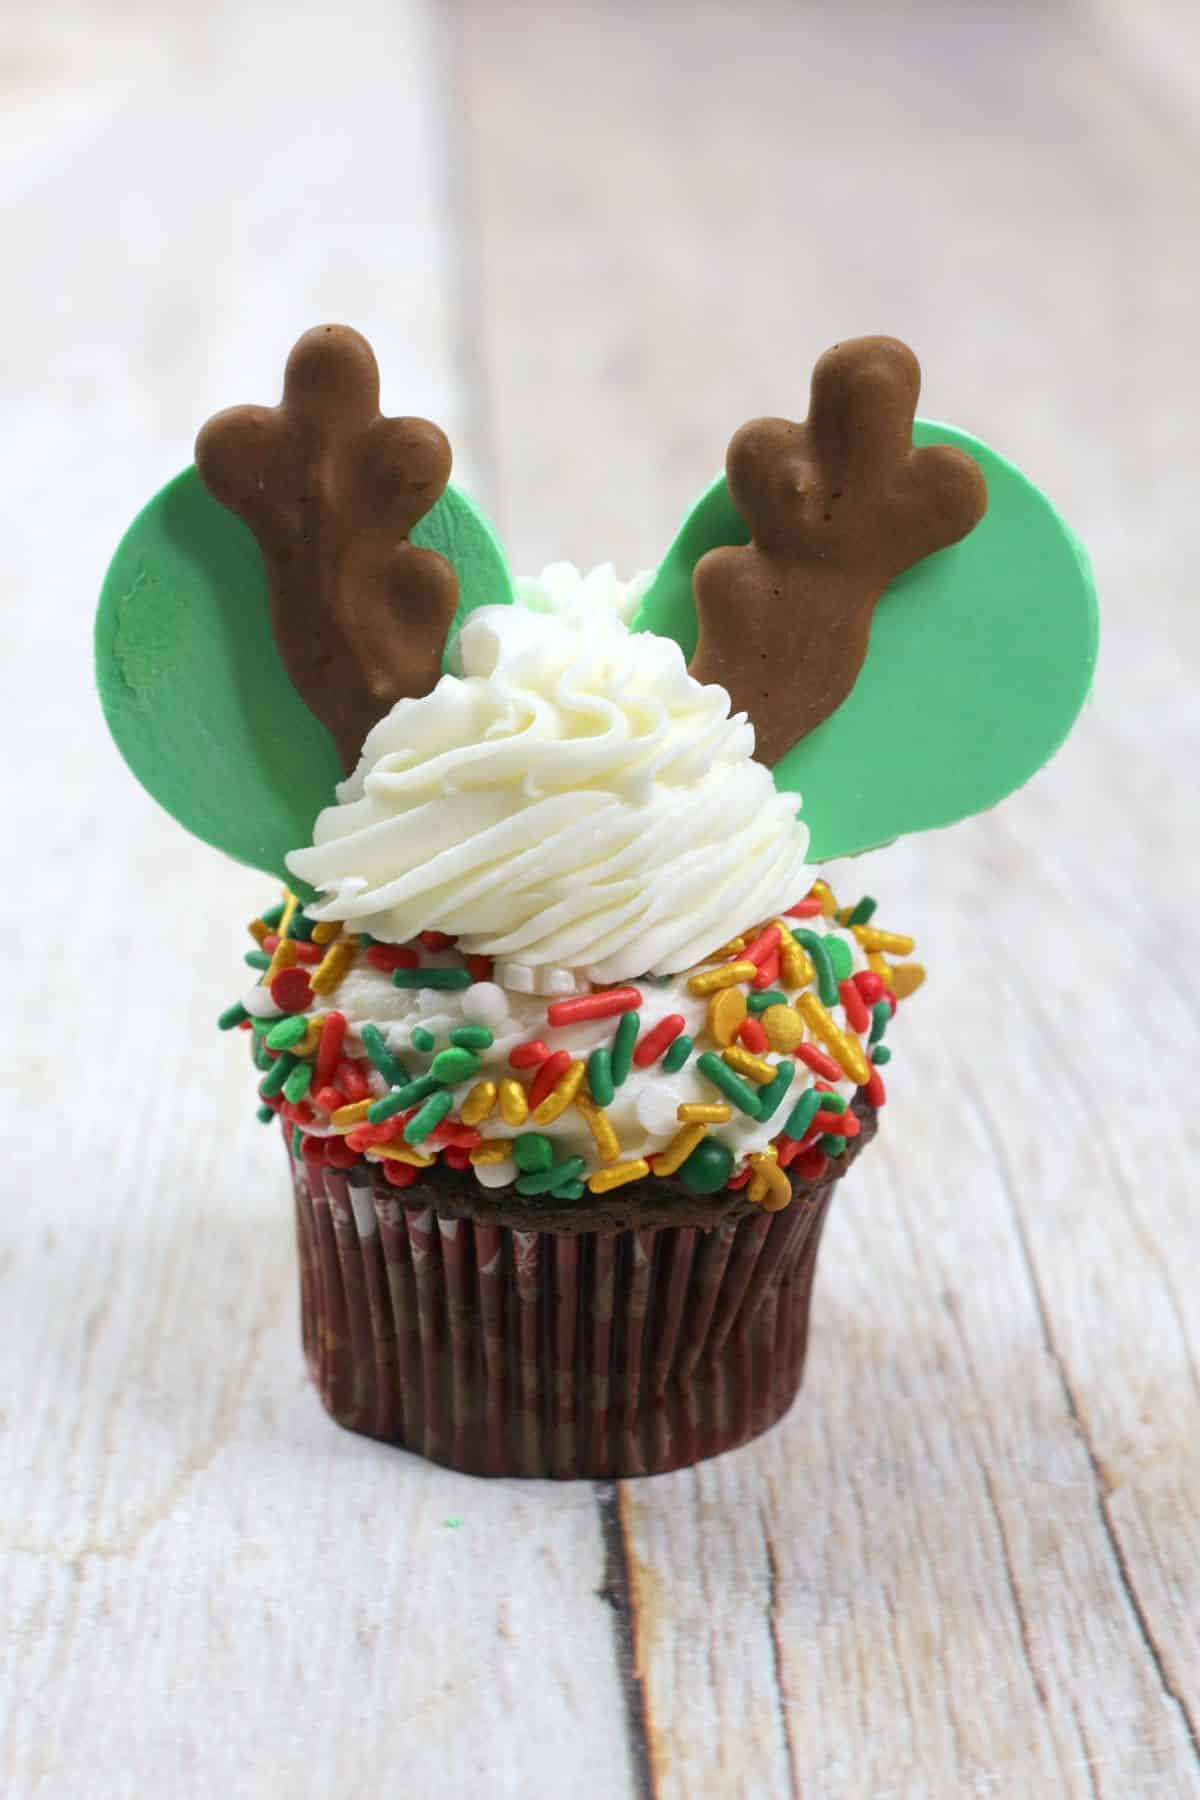 The antlers are added on the top of the frosting on the cupcake.